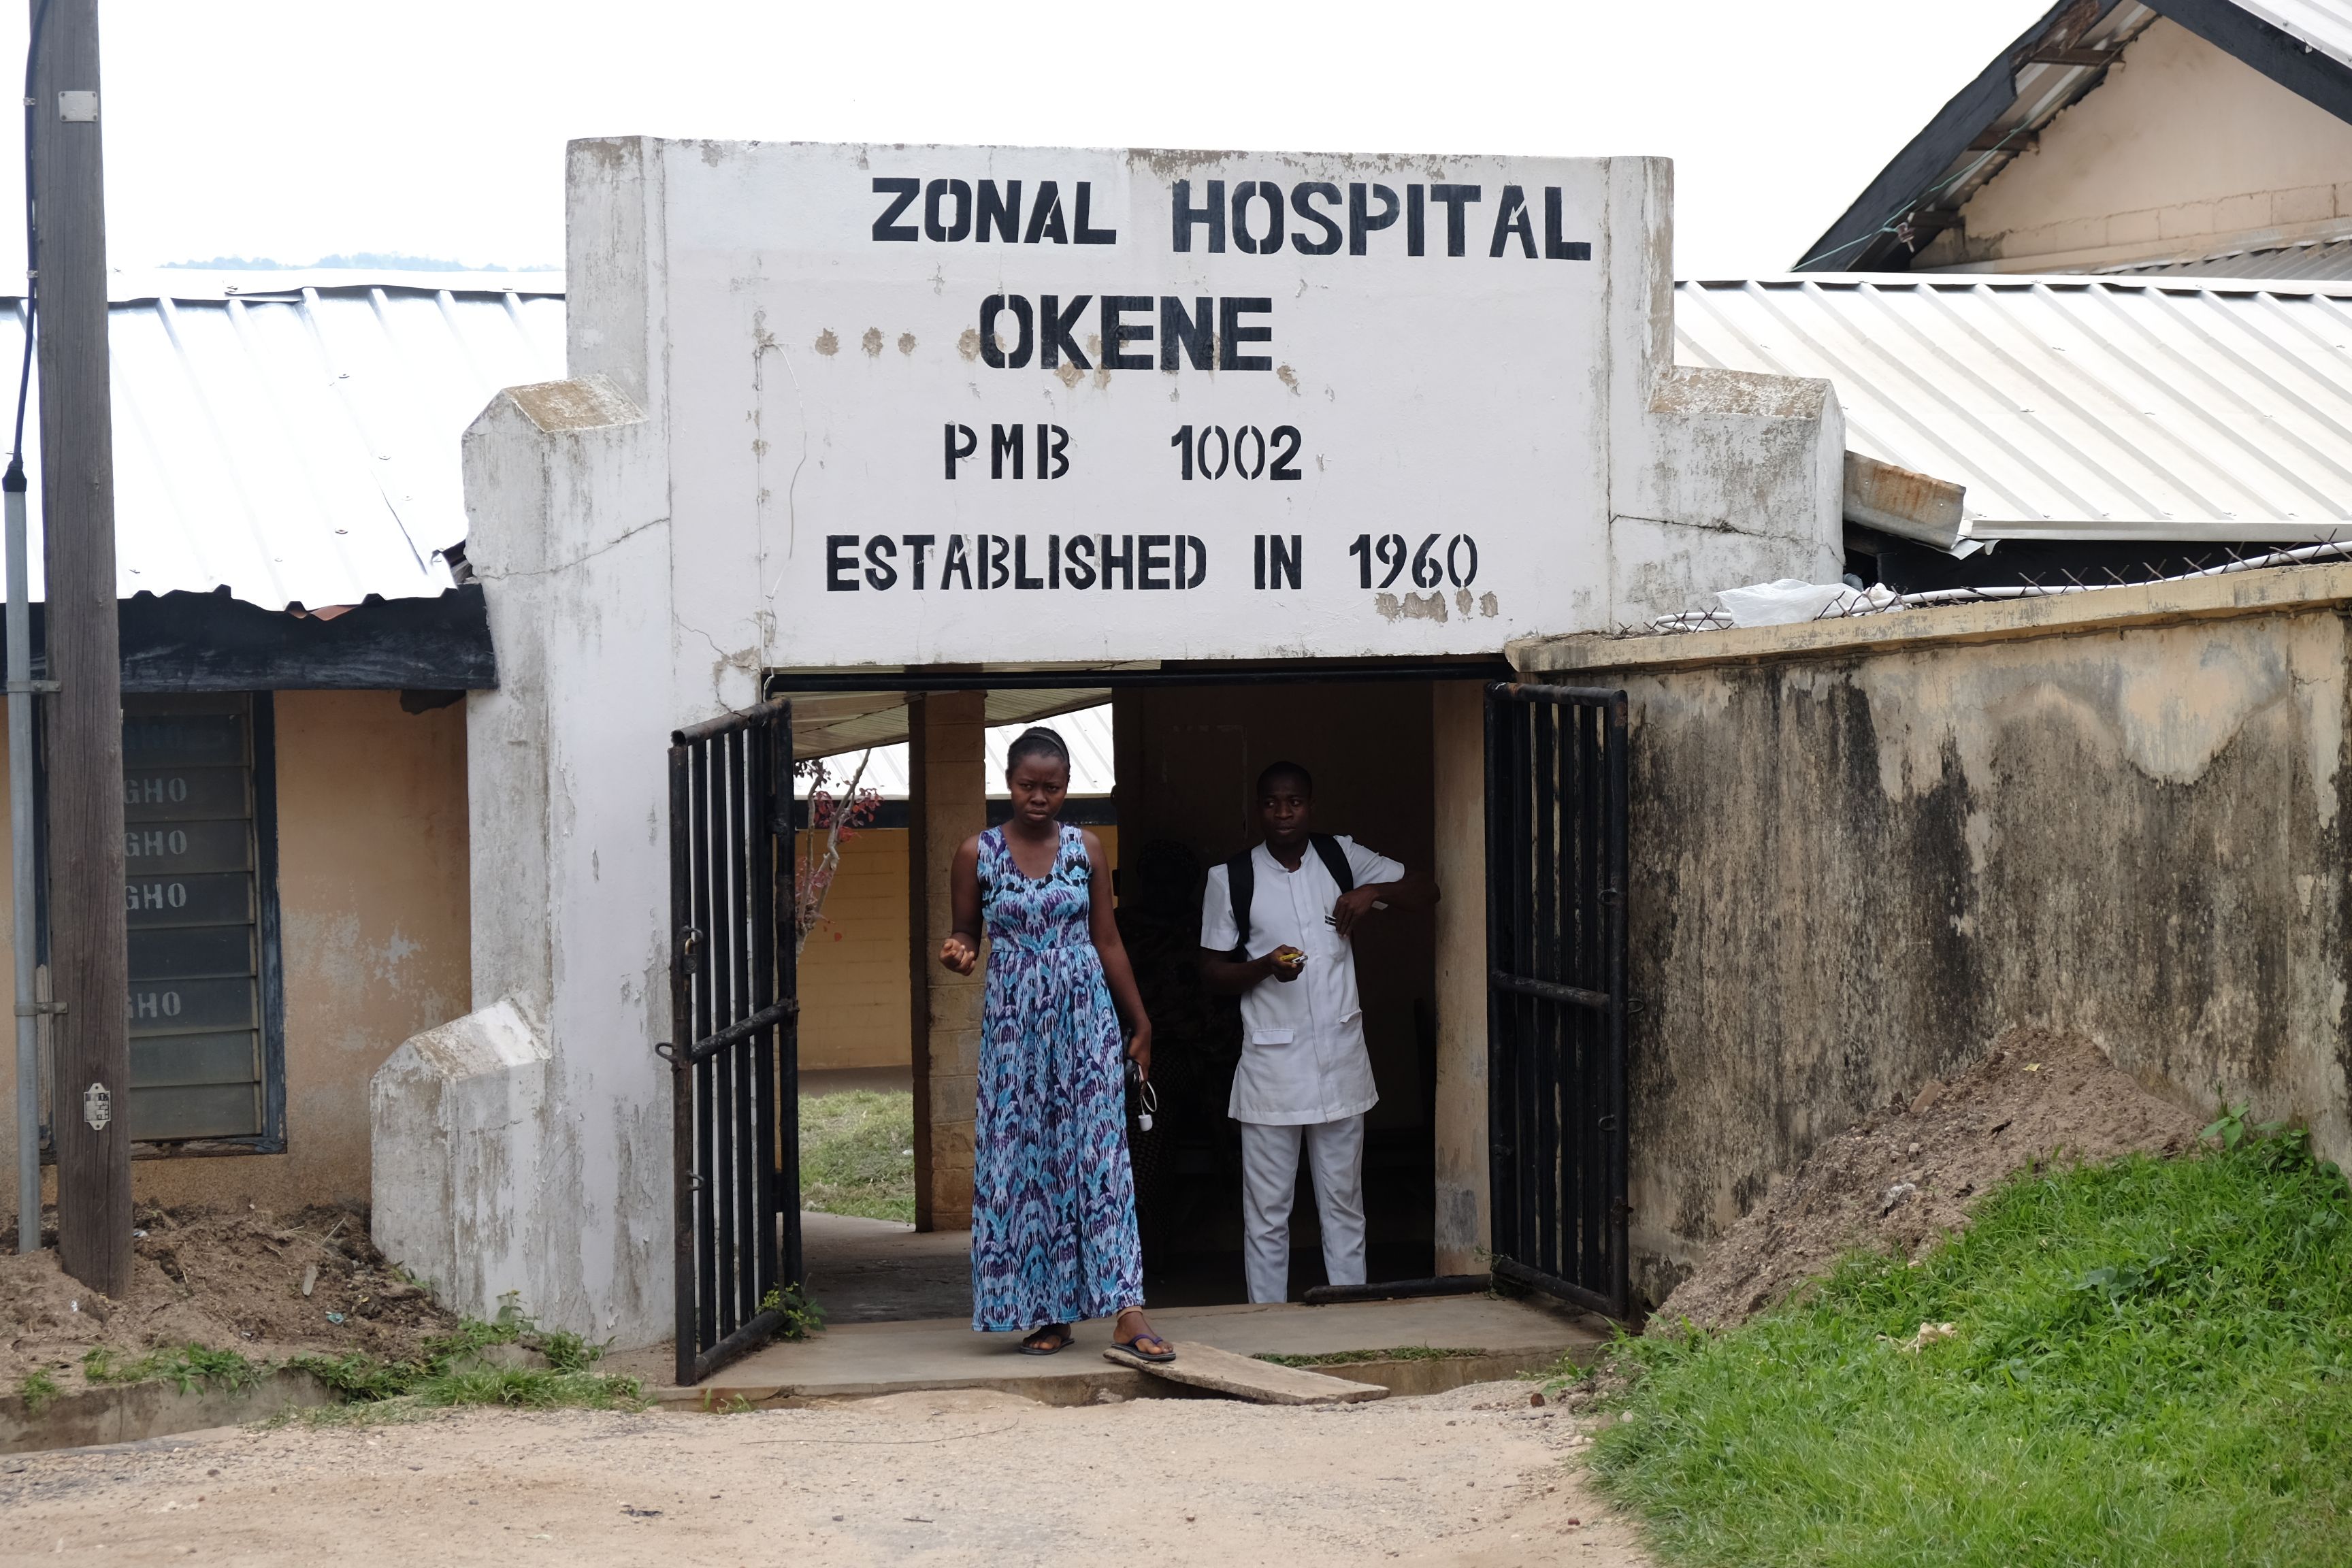 The entrance to the Okene Zonal Hospital in Kogi State, Nigeria. The hospital opened in 1960, the same year Nigeria gained its independence. Image by T.R. Goldman. Nigeria, 2017.